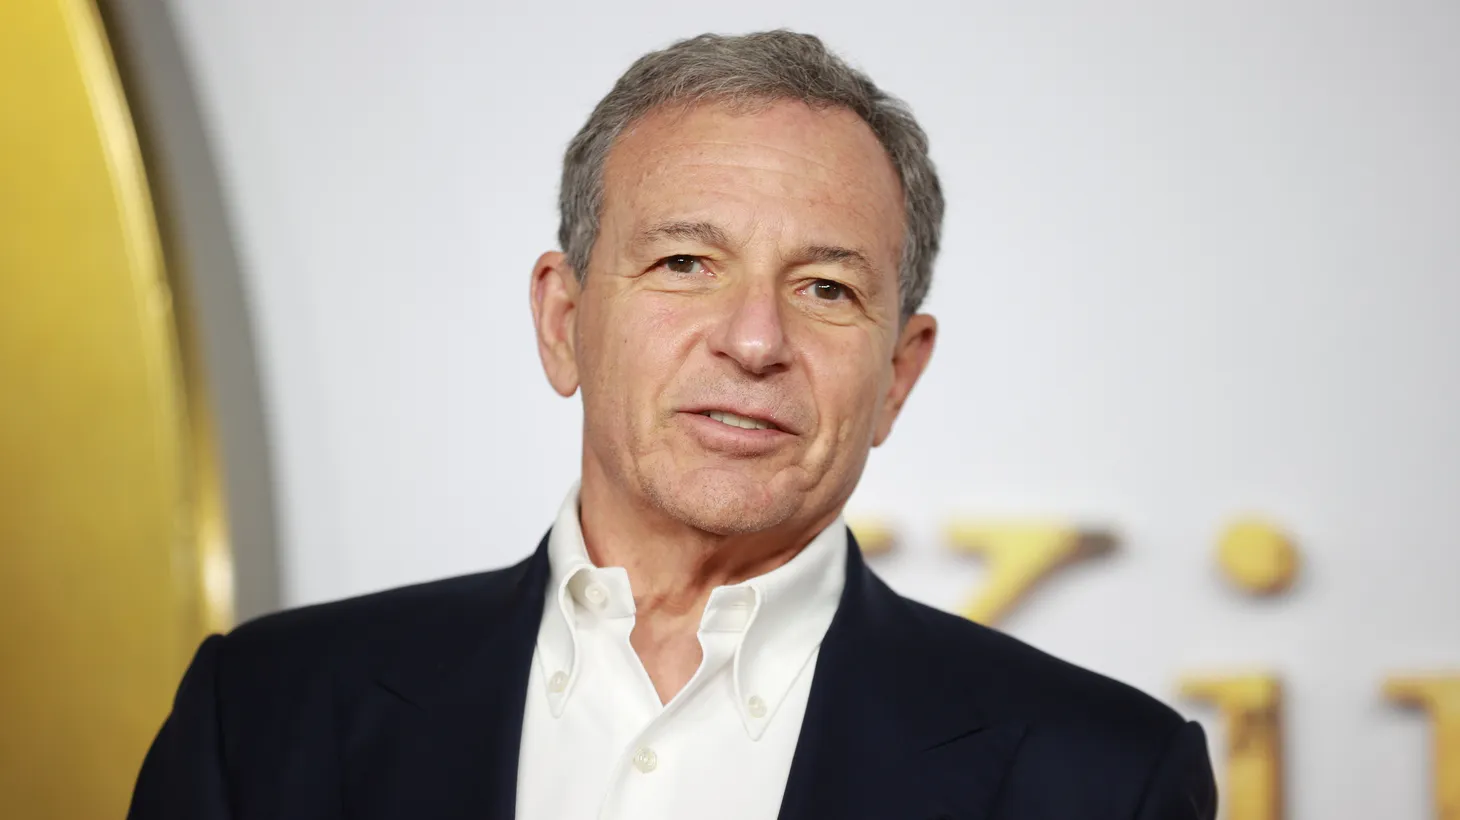 Executive Chairman of the Walt Disney Company, Bob Iger arrives at the world premiere for the film “The King's Man” at Leicester Square in London on December 6, 2021.